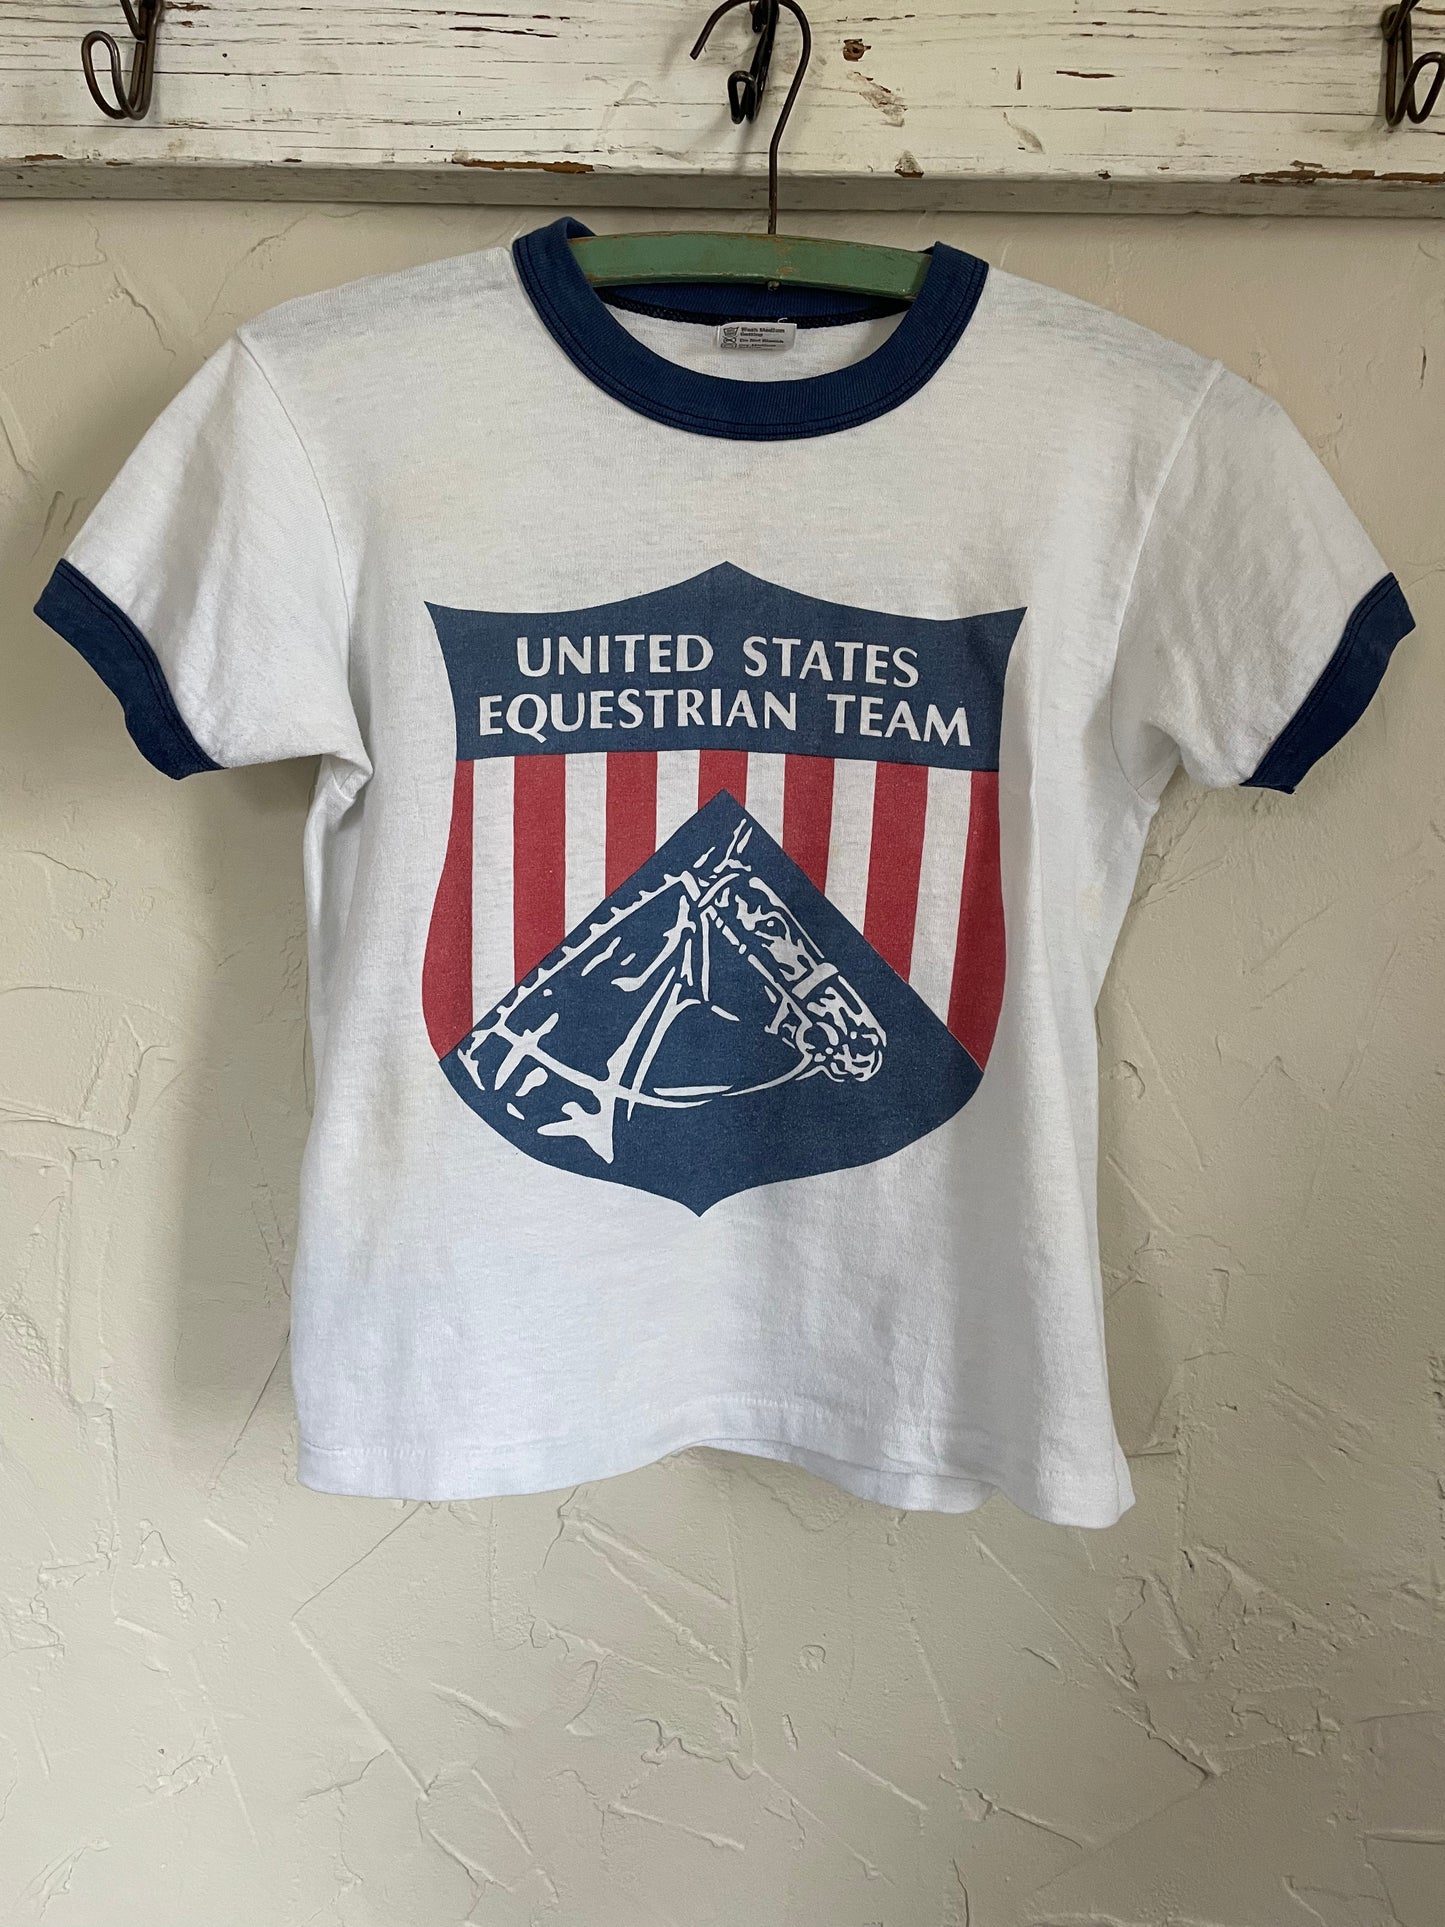 80s United States Equestrian Team Tee